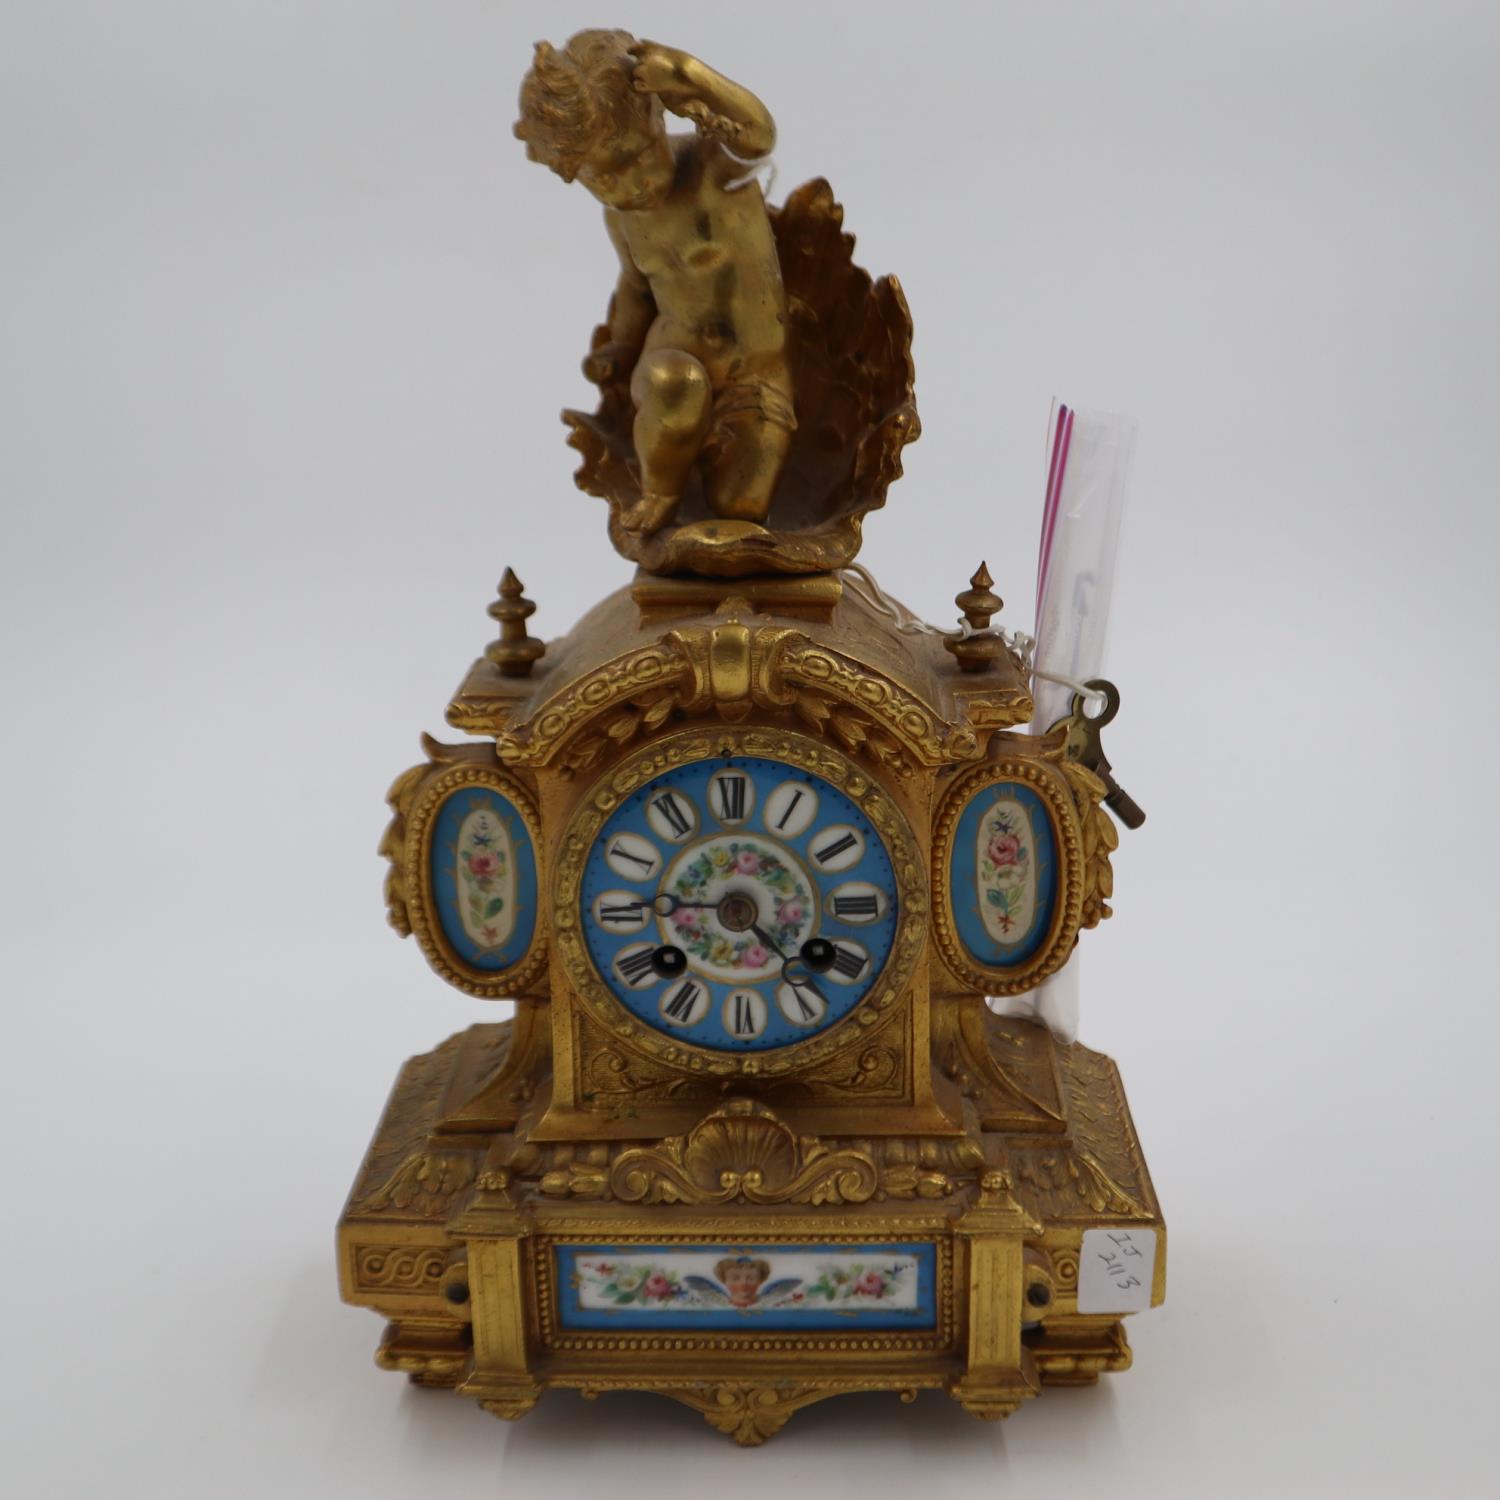 19th century figural gilt mantel clock with blue enamelled porcelain face and panels, decorated with